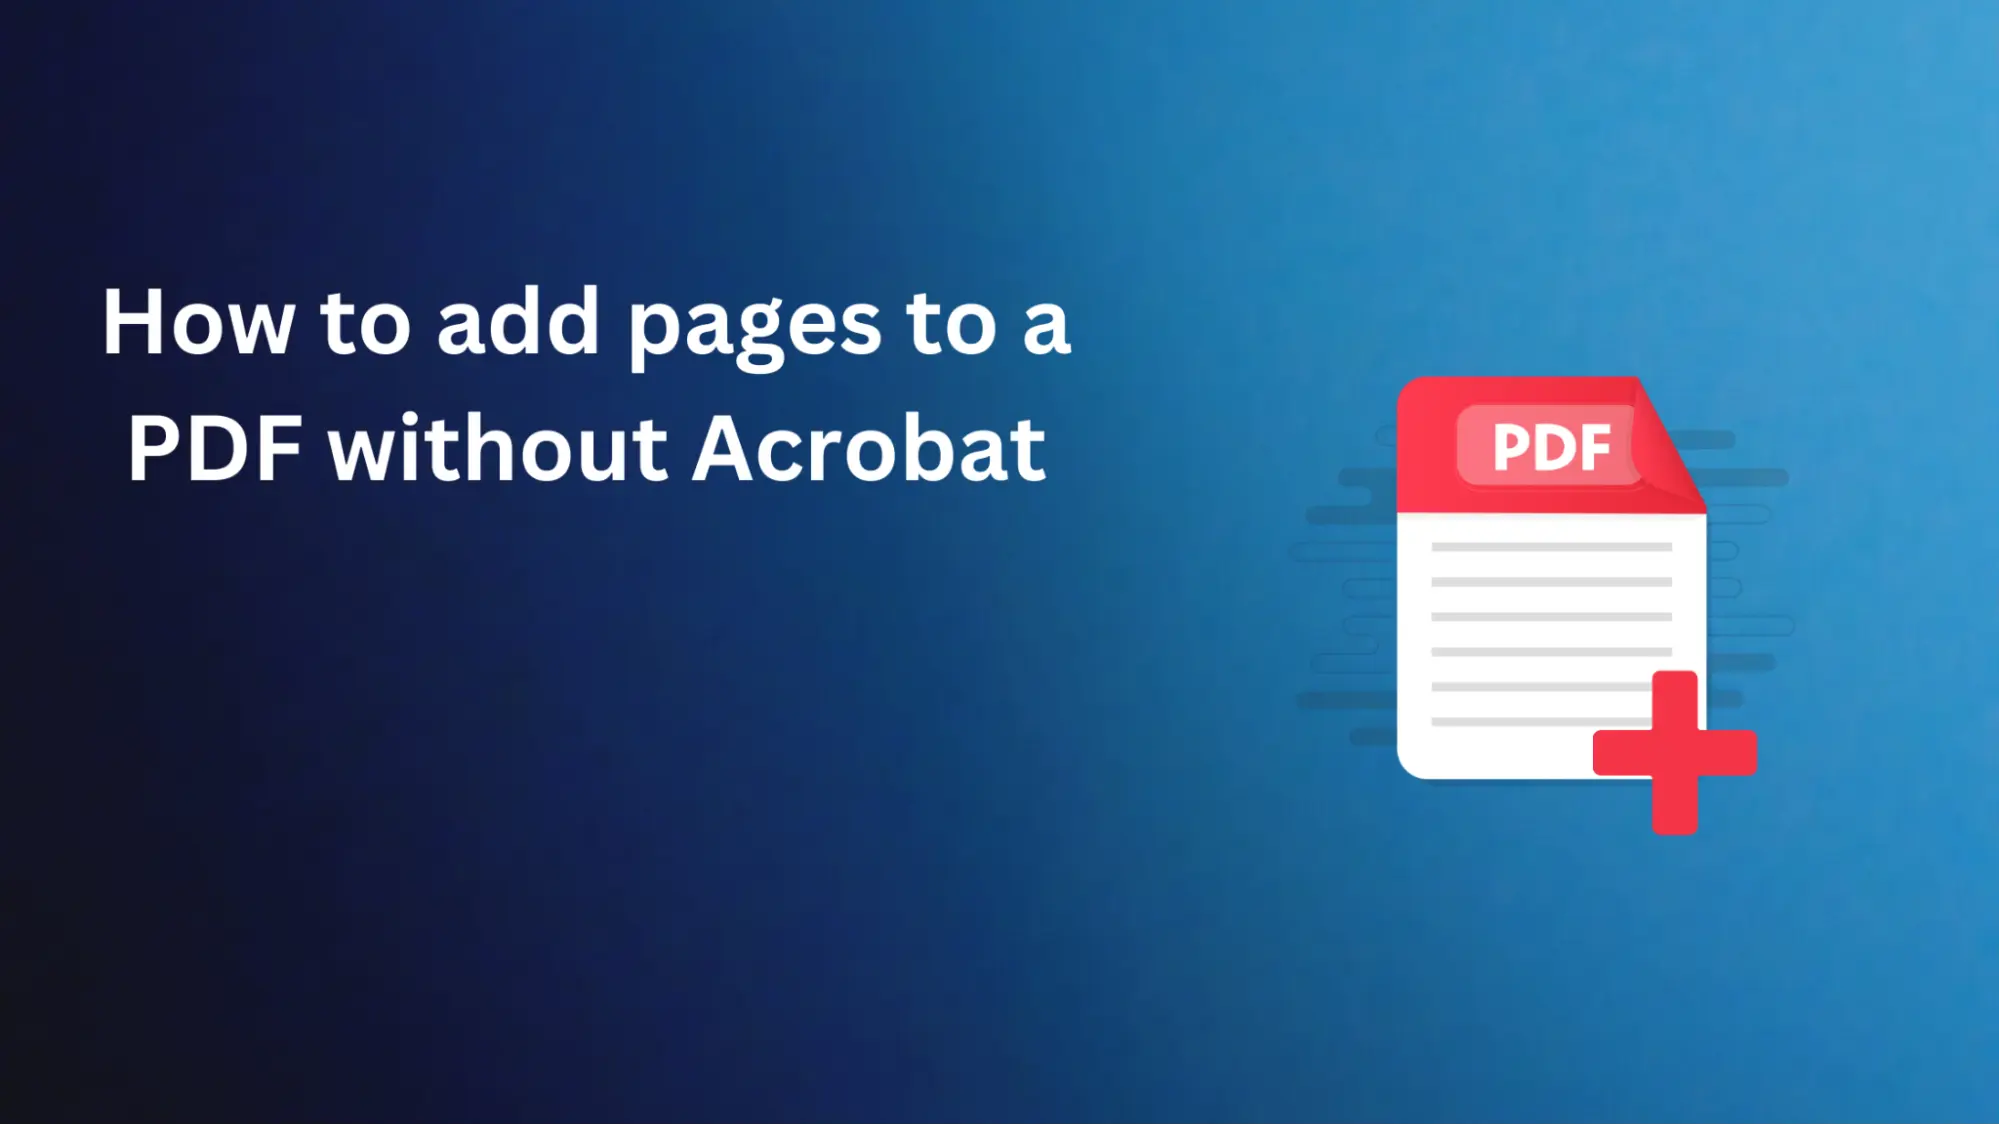 How to add pages to a PDF without Acrobat